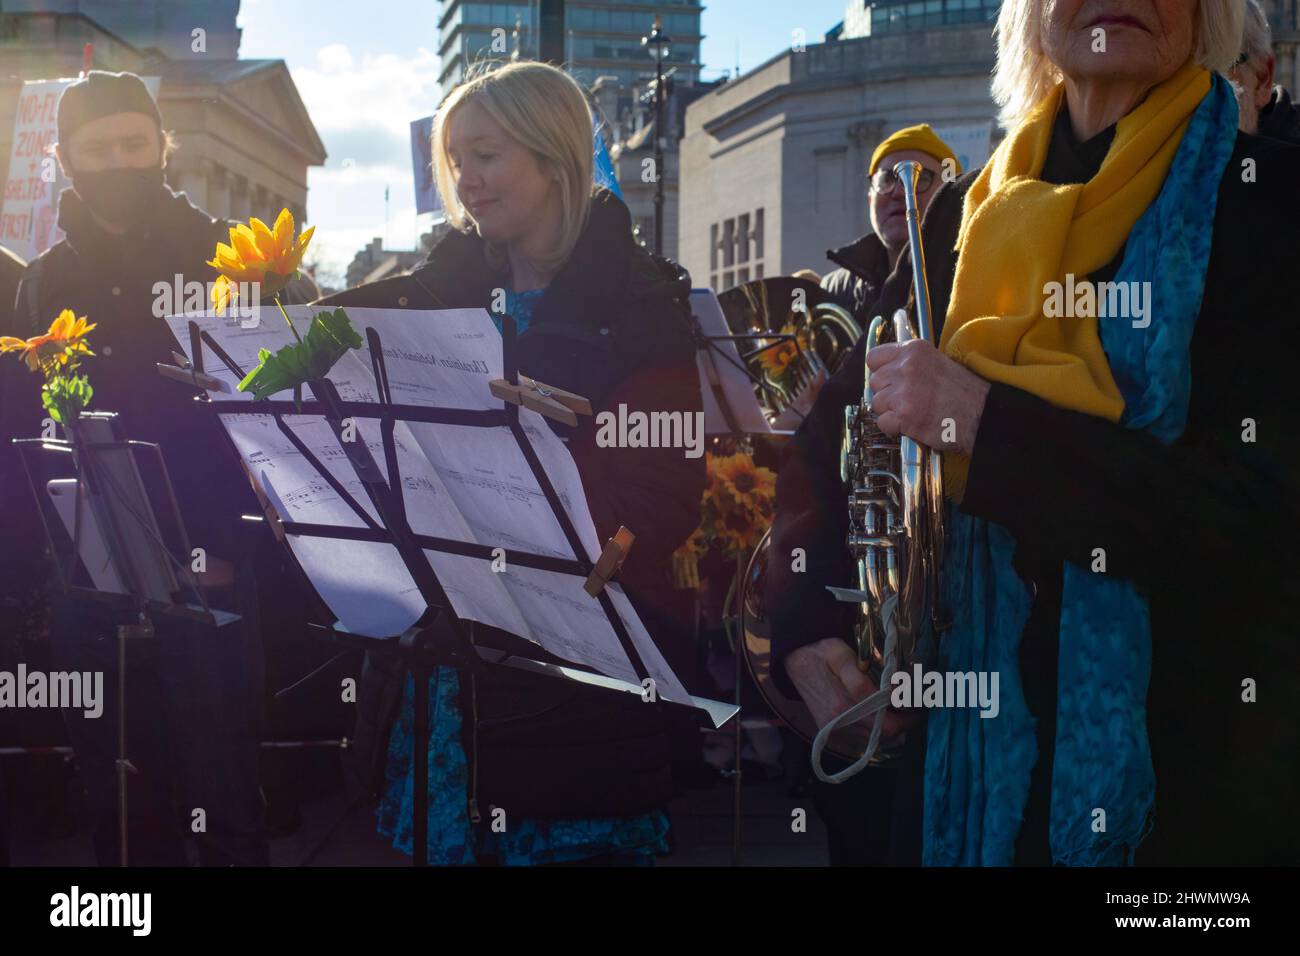 London, England, UK 6 March 2022 Musicians come together in Trafalgar Square to play a concert for peace, in solidarity with the Ukrainian people Credit: Denise Laura Baker/Alamy Live News Stock Photo